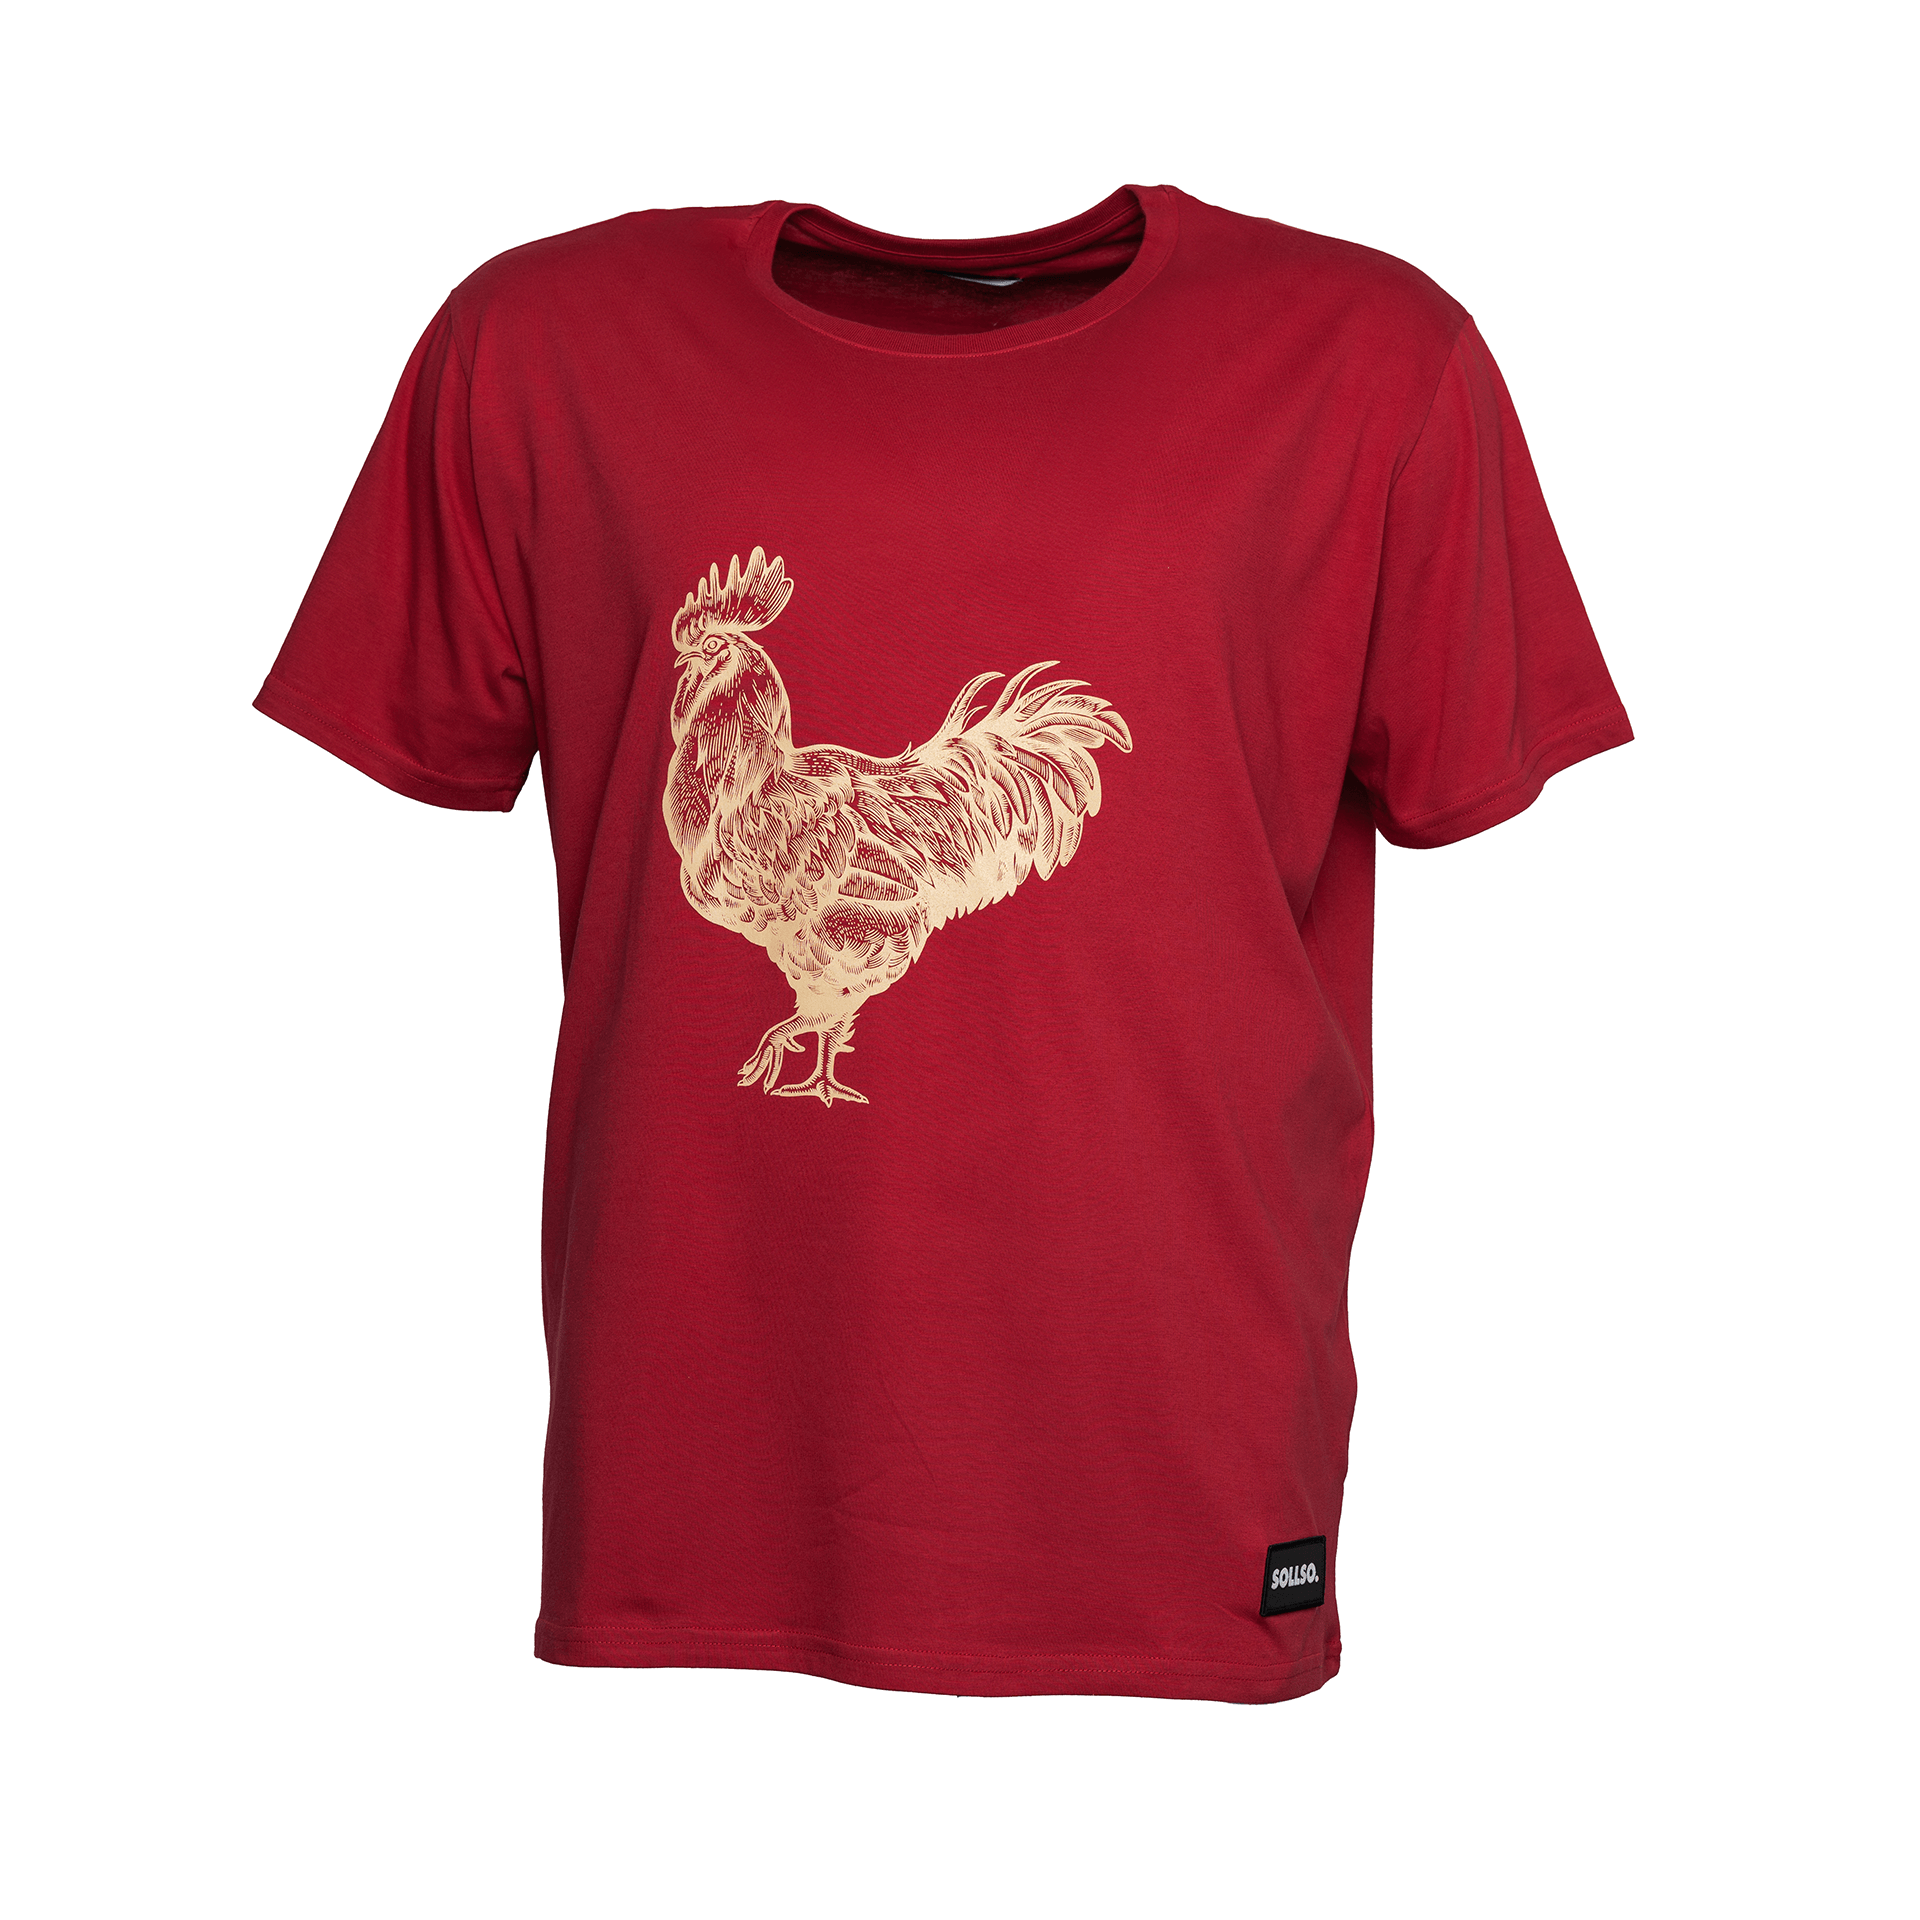 SOLLSO. T-Shirt "Rooster", Farbe Ginger Red, Größe 8XL